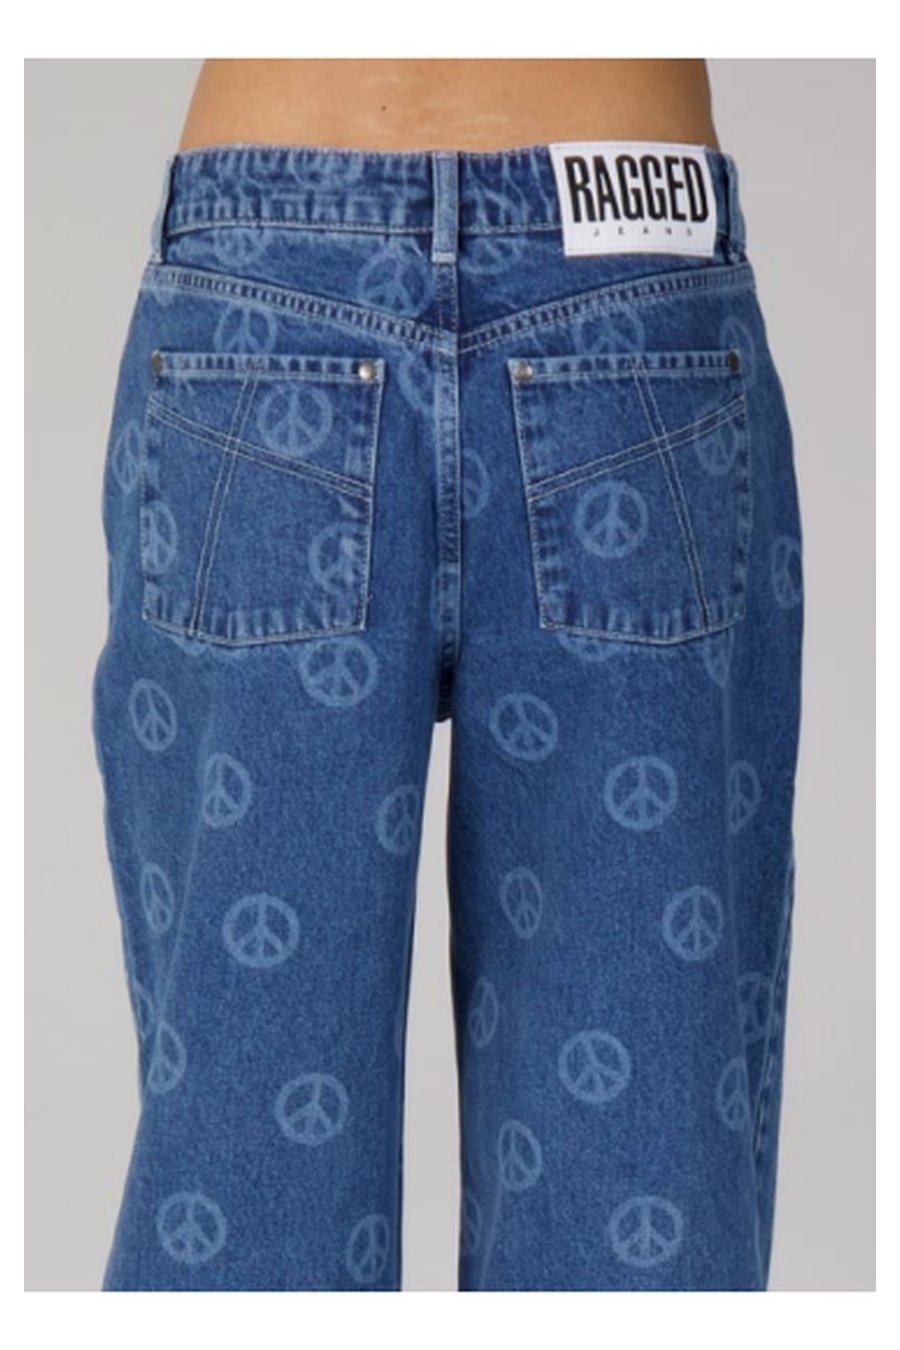 Buy The Ragged Priest Yin Yang Printed Hope Release Jeans at Spoiled Brat  Online - UK online Fashion &amp; lifestyle boutique